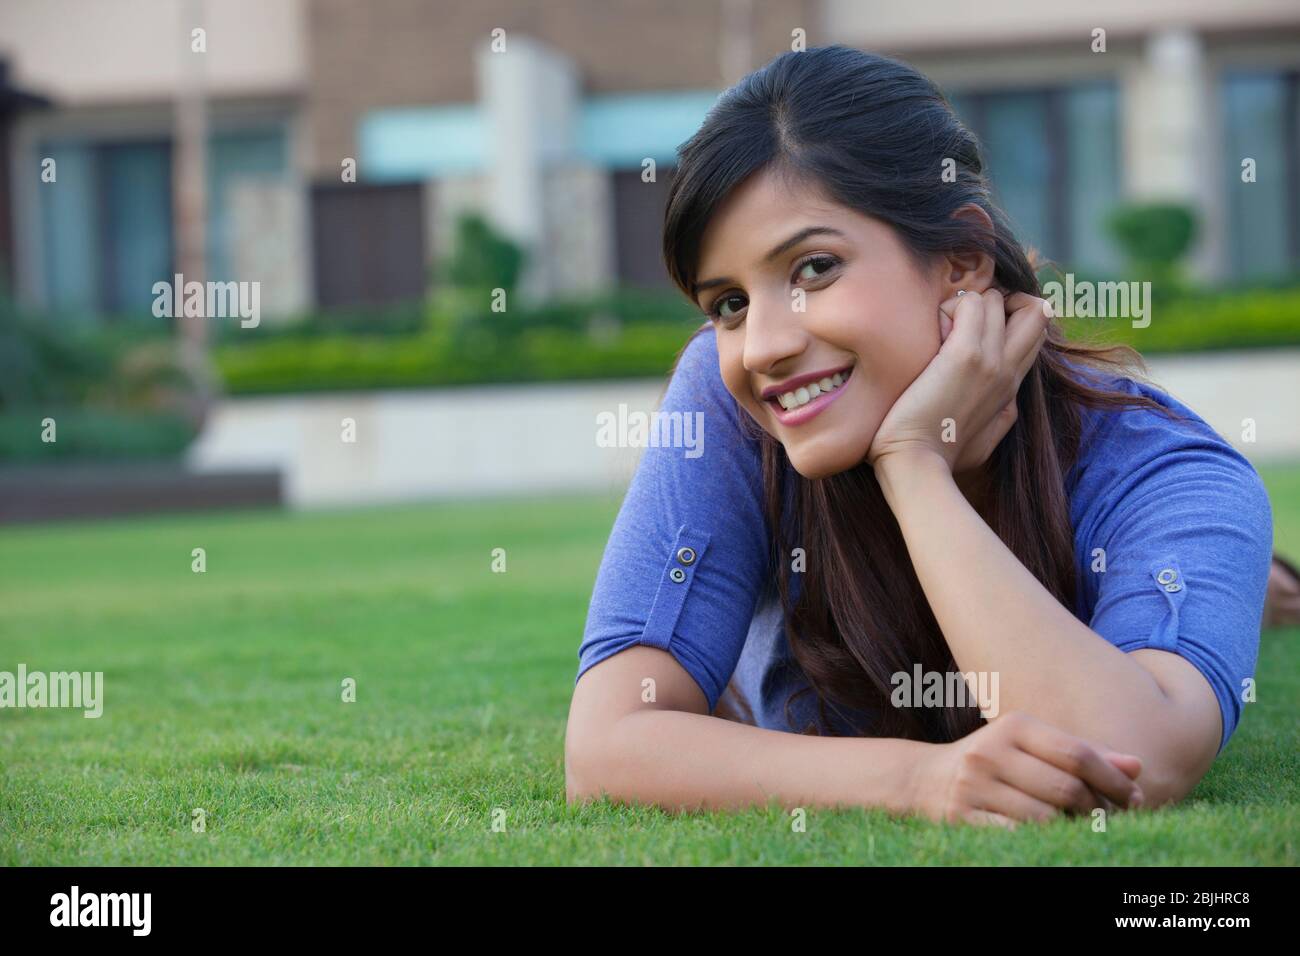 Portrait of a woman lying on a lawn Stock Photo